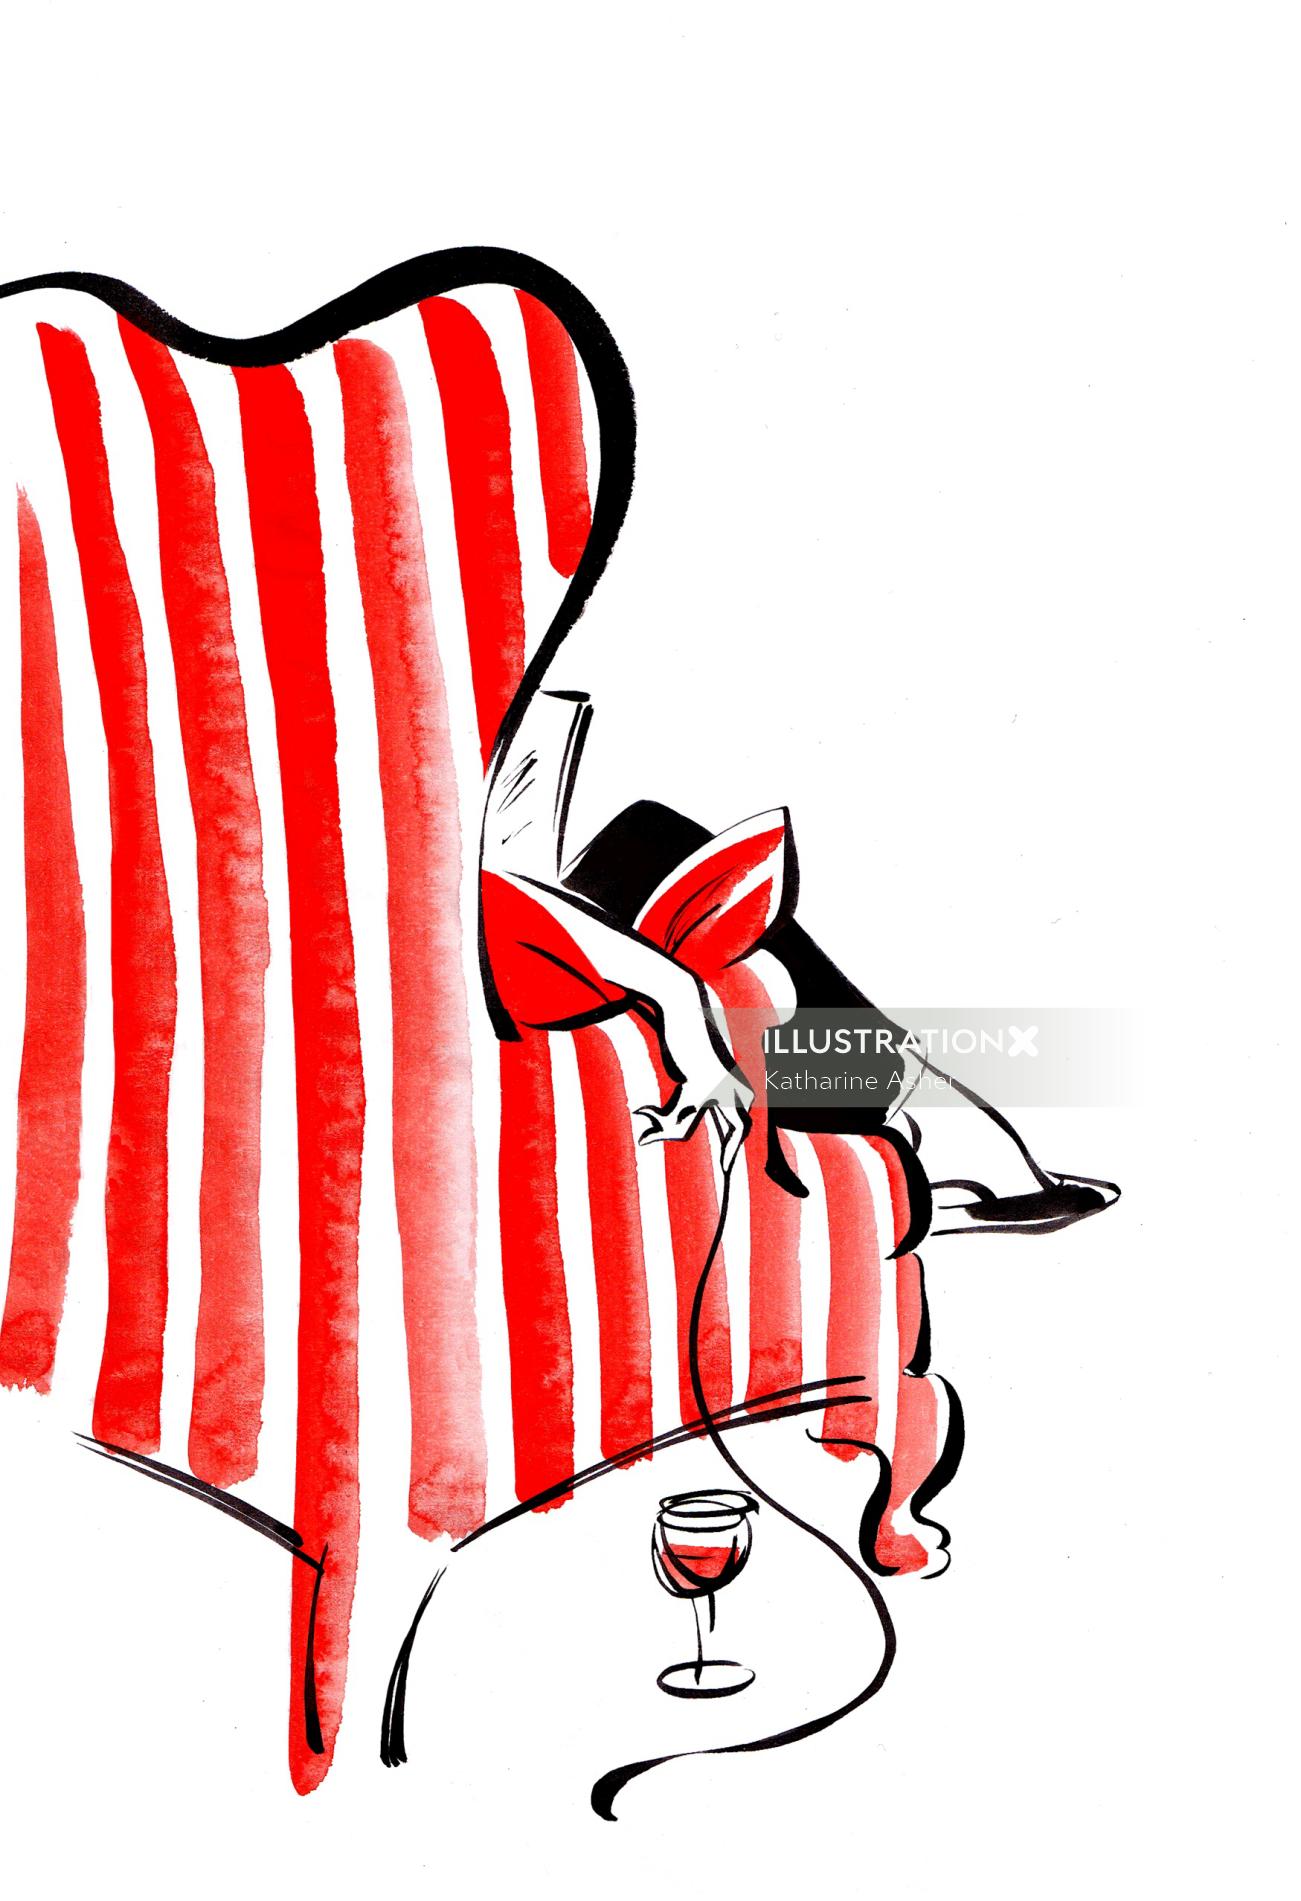 Armchair surfing illustration by Katharine Asher